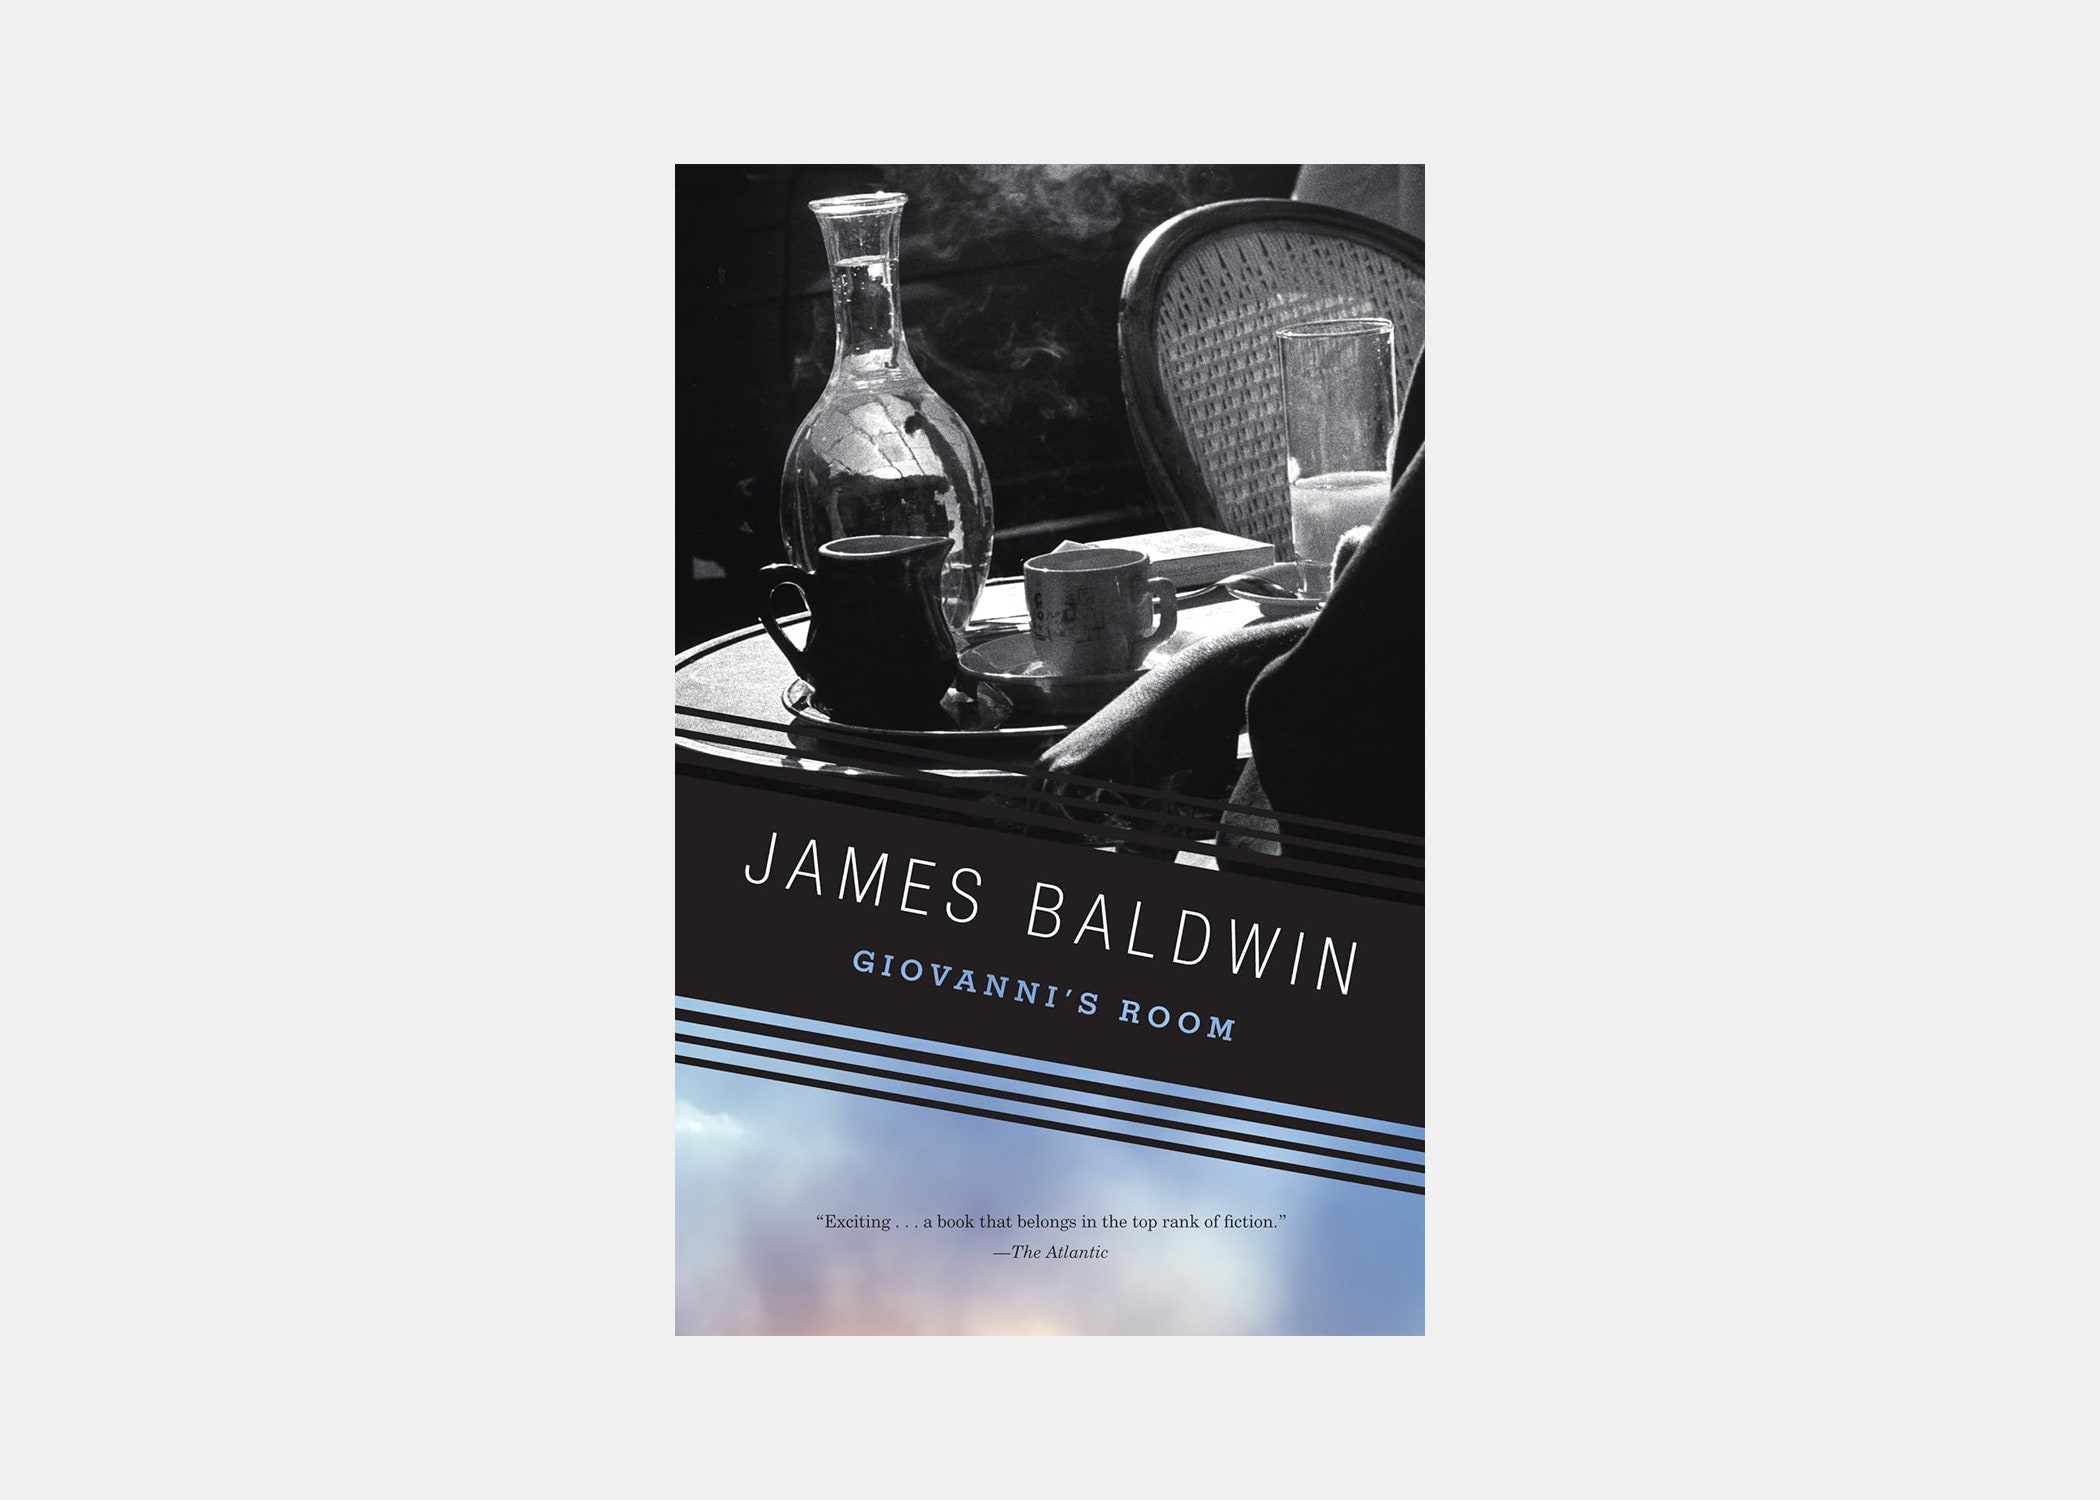 <p><strong>What it’s about:</strong> Jump ahead a few decades to the 1950s, after Hemingway’s and Gertrude Stein’s Lost Generation of artists hit Paris, and you’ll run into James Baldwin on the streets of Saint-Germain-Des-Prés (for a while, he lived at the <a href="https://www.cntraveler.com/hotels/france/paris/hotel-verneuil-paris?mbid=synd_msn_rss&utm_source=msn&utm_medium=syndication">Hôtel Verneuil</a>, among other auberges in the city). While in France, Baldwin wrote his memoir <a href="https://cna.st/affiliate-link/2h8zKZvUAqv9ZGdPBBMCgc3ucFhn3FFRsivSjhQfLfnnqsCfuwqYYNiF7vij4qJB933H6XeRdb866WWnbkd9ydwpqsi5MFAgZXJkZiC2Qf8HGAfjJH6jTvPZinHnSkfZqSzuwMiqKjhTtgyETH9SfYjDPSA9wqSs6HwLkX5wZPn7g5ov9V" rel="sponsored"><em>Notes of a Native Son</em></a>, part of which examines American culture and identity from an expatriate perspective. However, the influence of his life in France is most keenly evident in his novel <em>Giovanni’s Room</em>, which tells the story of David, an American man in Paris grappling with his intense romantic and sexual feelings for Giovanni, an Italian bartender. It’s an ultimately, tragic story, and an early exploration of queerness, social alienation, and masculinity—groundbreaking when it was published in 1956, and a classic masterpiece of English literature today.</p> <p><strong>You should read this when:</strong> You’re craving a moody escape to Paris that leaves you heartbroken and questioning your personal morals (you know, for a bit of light reading).</p> <p><strong>The book’s opening lines:</strong> “I stand at the window of this great house in the south of France as night falls, the night which is leading me to the most terrible morning of my life. I have a drink in my hand, there is a bottle at my elbow. … I may be drunk by morning but that will not do any good. I shall take the train to Paris anyway.”</p> $14, Amazon. <a href="https://www.amazon.com/Giovannis-Room-James-Baldwin/dp/0345806565/ref=sr_1_1">Get it now!</a><p>Sign up to receive the latest news, expert tips, and inspiration on all things travel</p><a href="https://www.cntraveler.com/newsletter/the-daily?sourceCode=msnsend">Inspire Me</a>